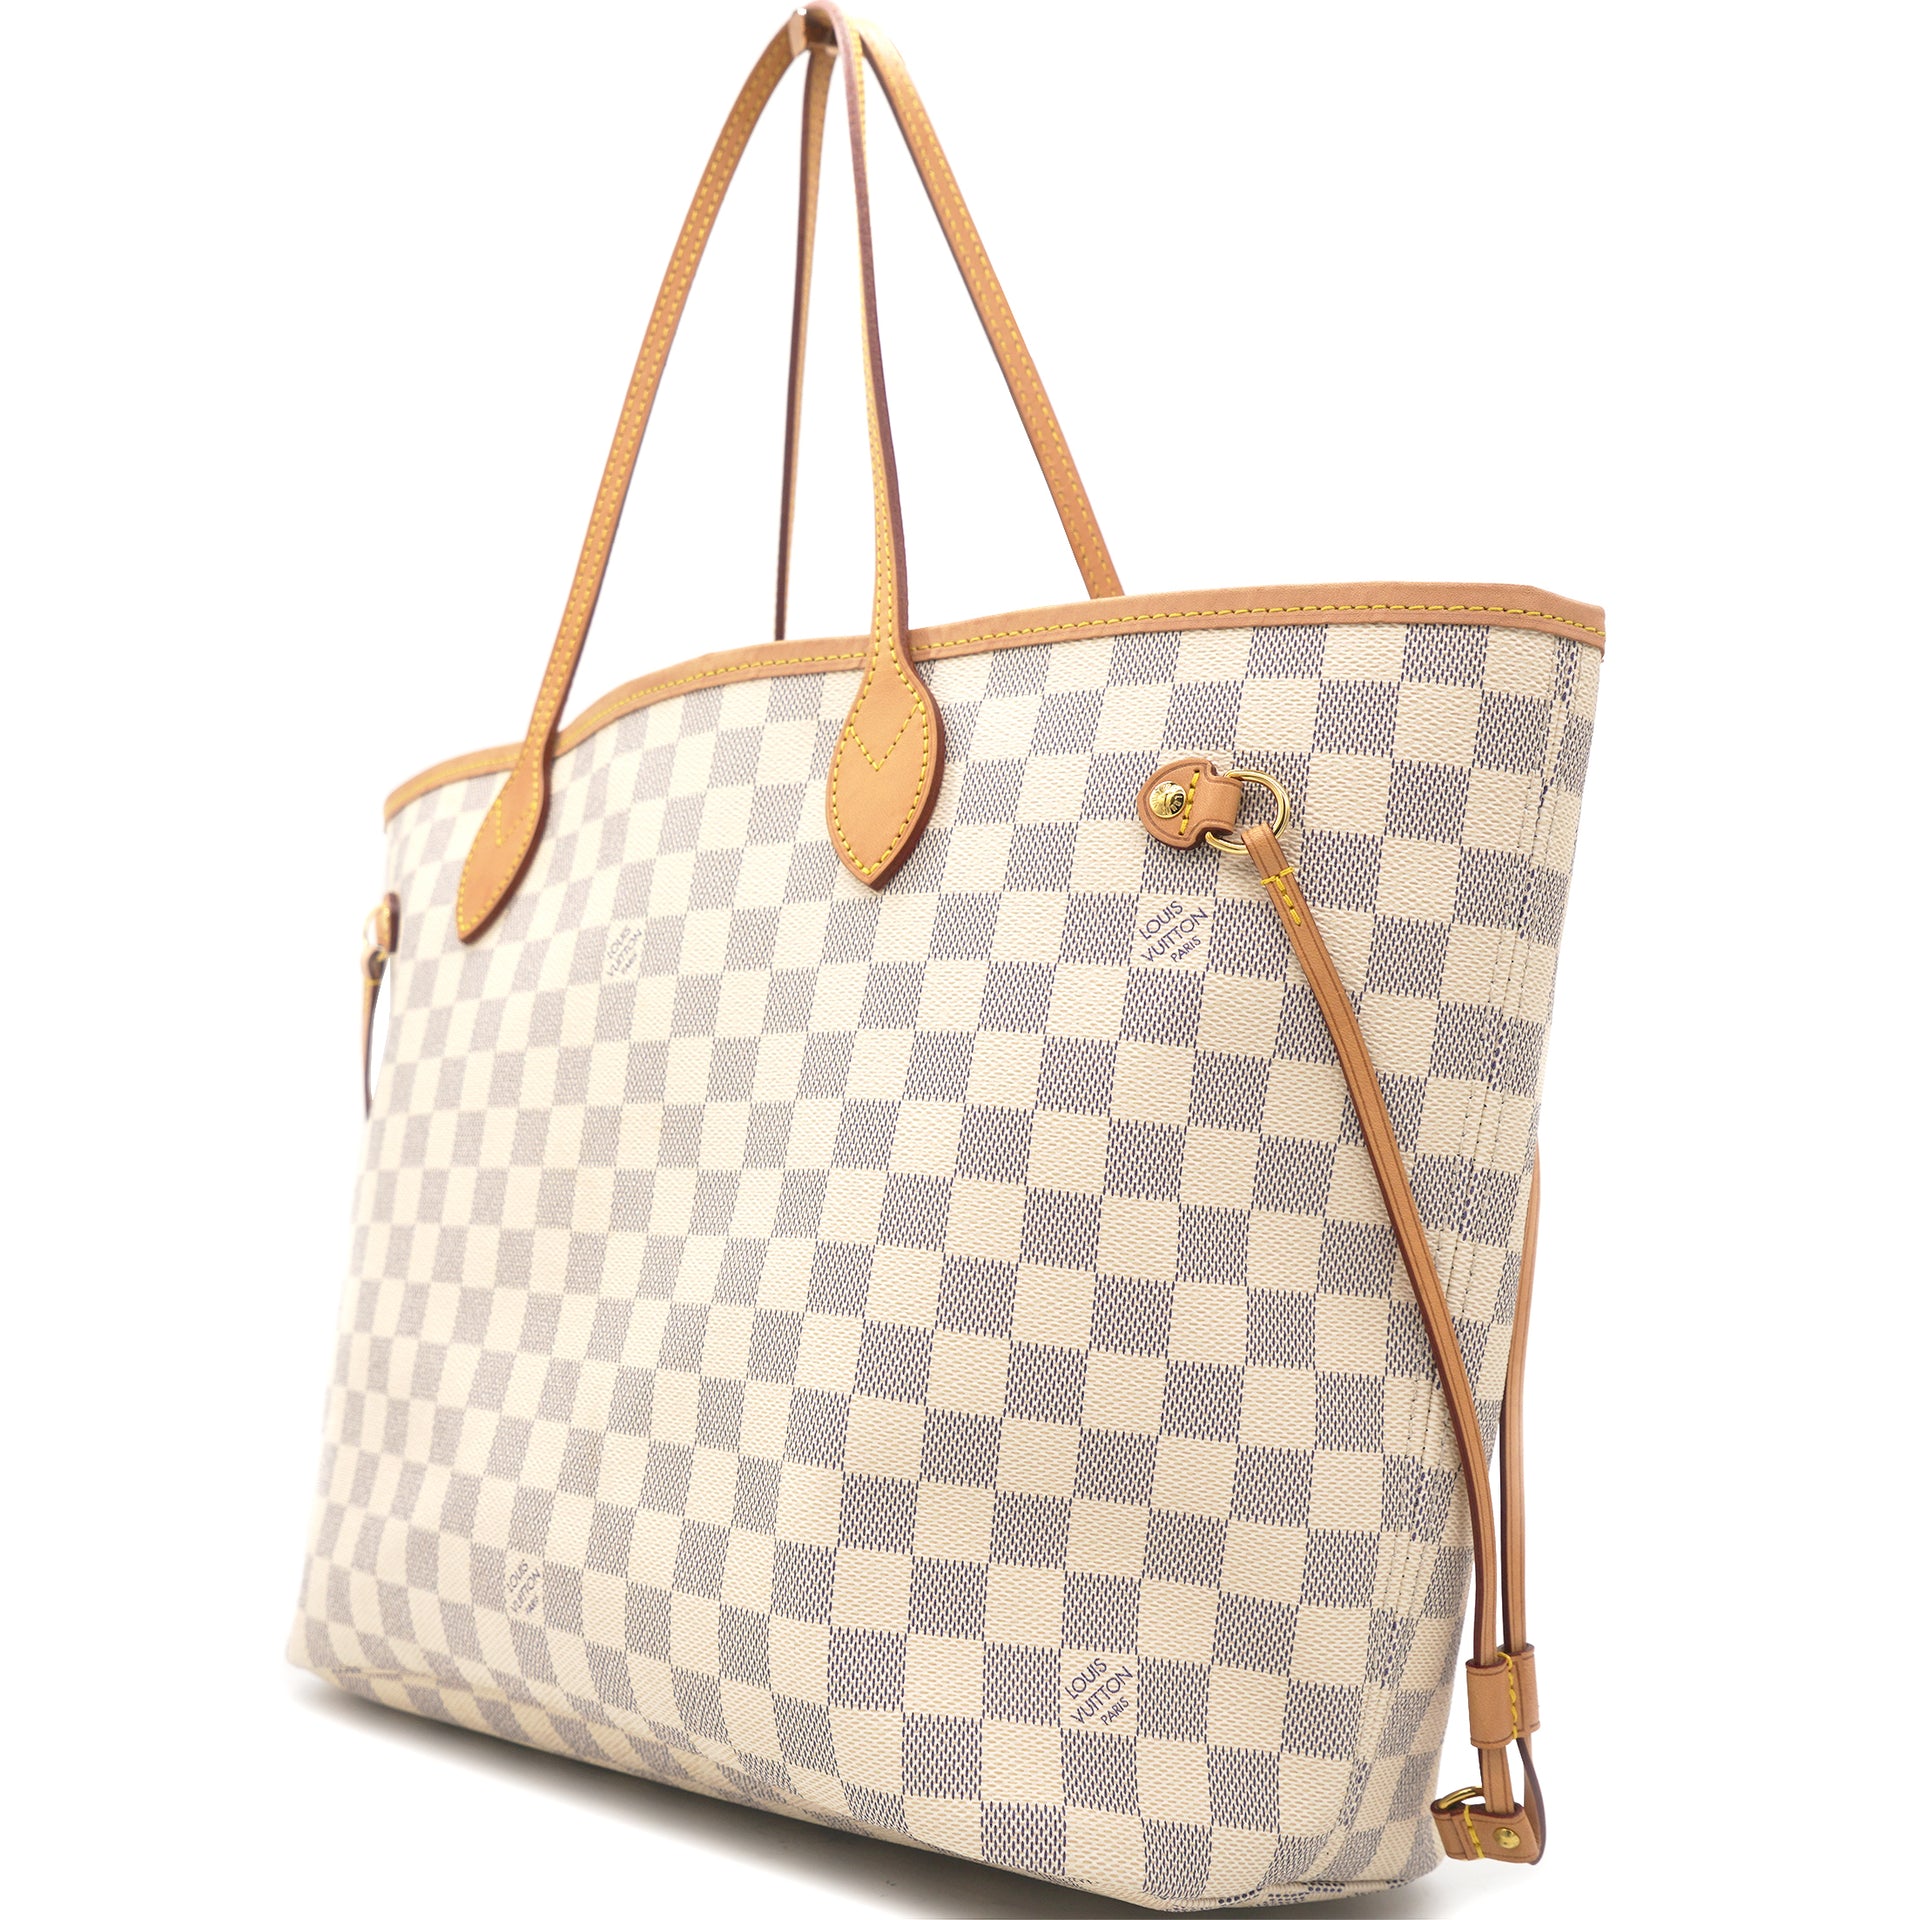 Damier Azur Canvas Neverfull MM Tote Authentic PreOwned  The Lady Bag